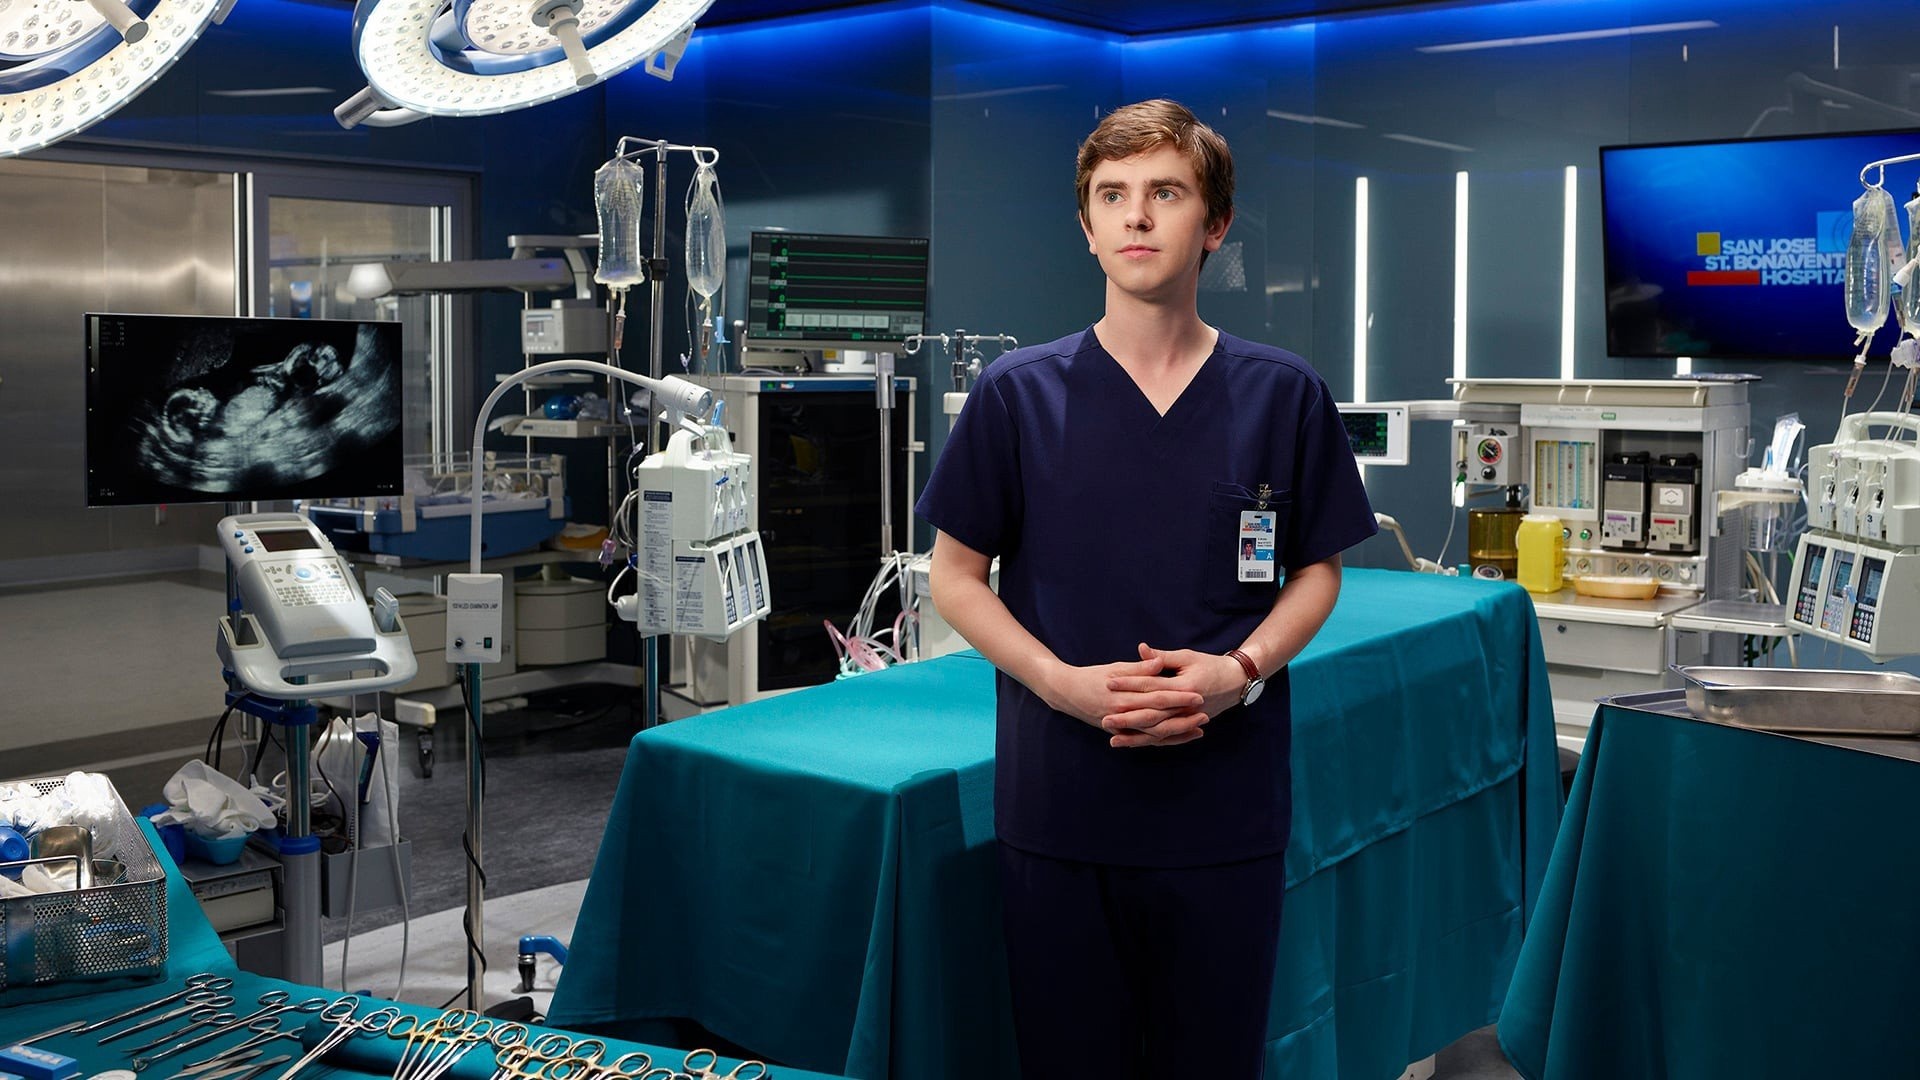 The Good Doctor, Staffel 3a, Assistenzrzte, Seriesly Awesome, 1920x1080 Full HD Desktop